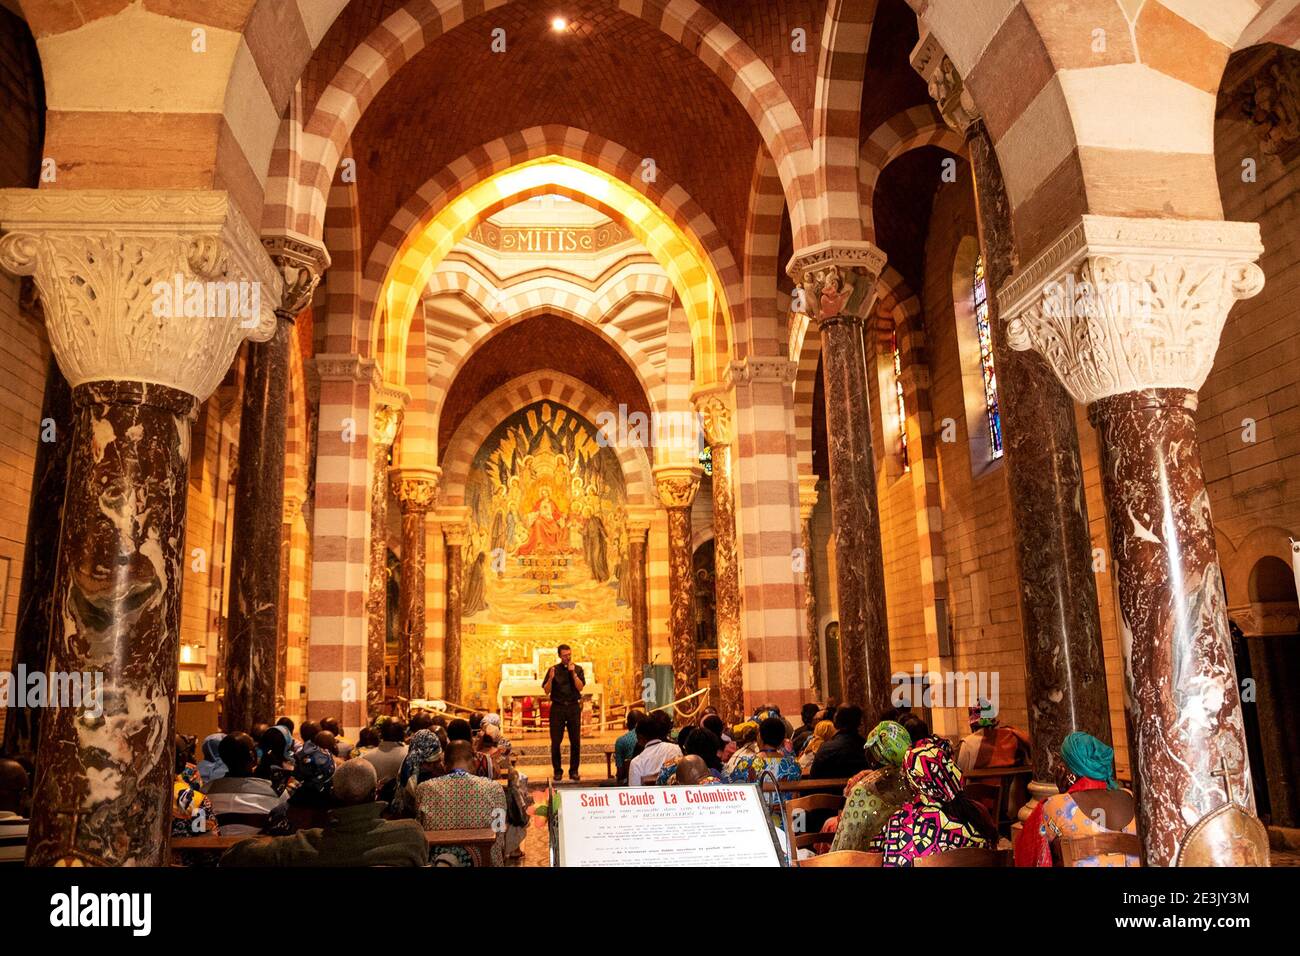 PARAY-LE-MONIAL, FRANCE - AUGUST 25, 2018: African pilgrims in Chapel of St. Claude de la Colombiere (who was canonized by Pope John Paul II in 1992) Stock Photo